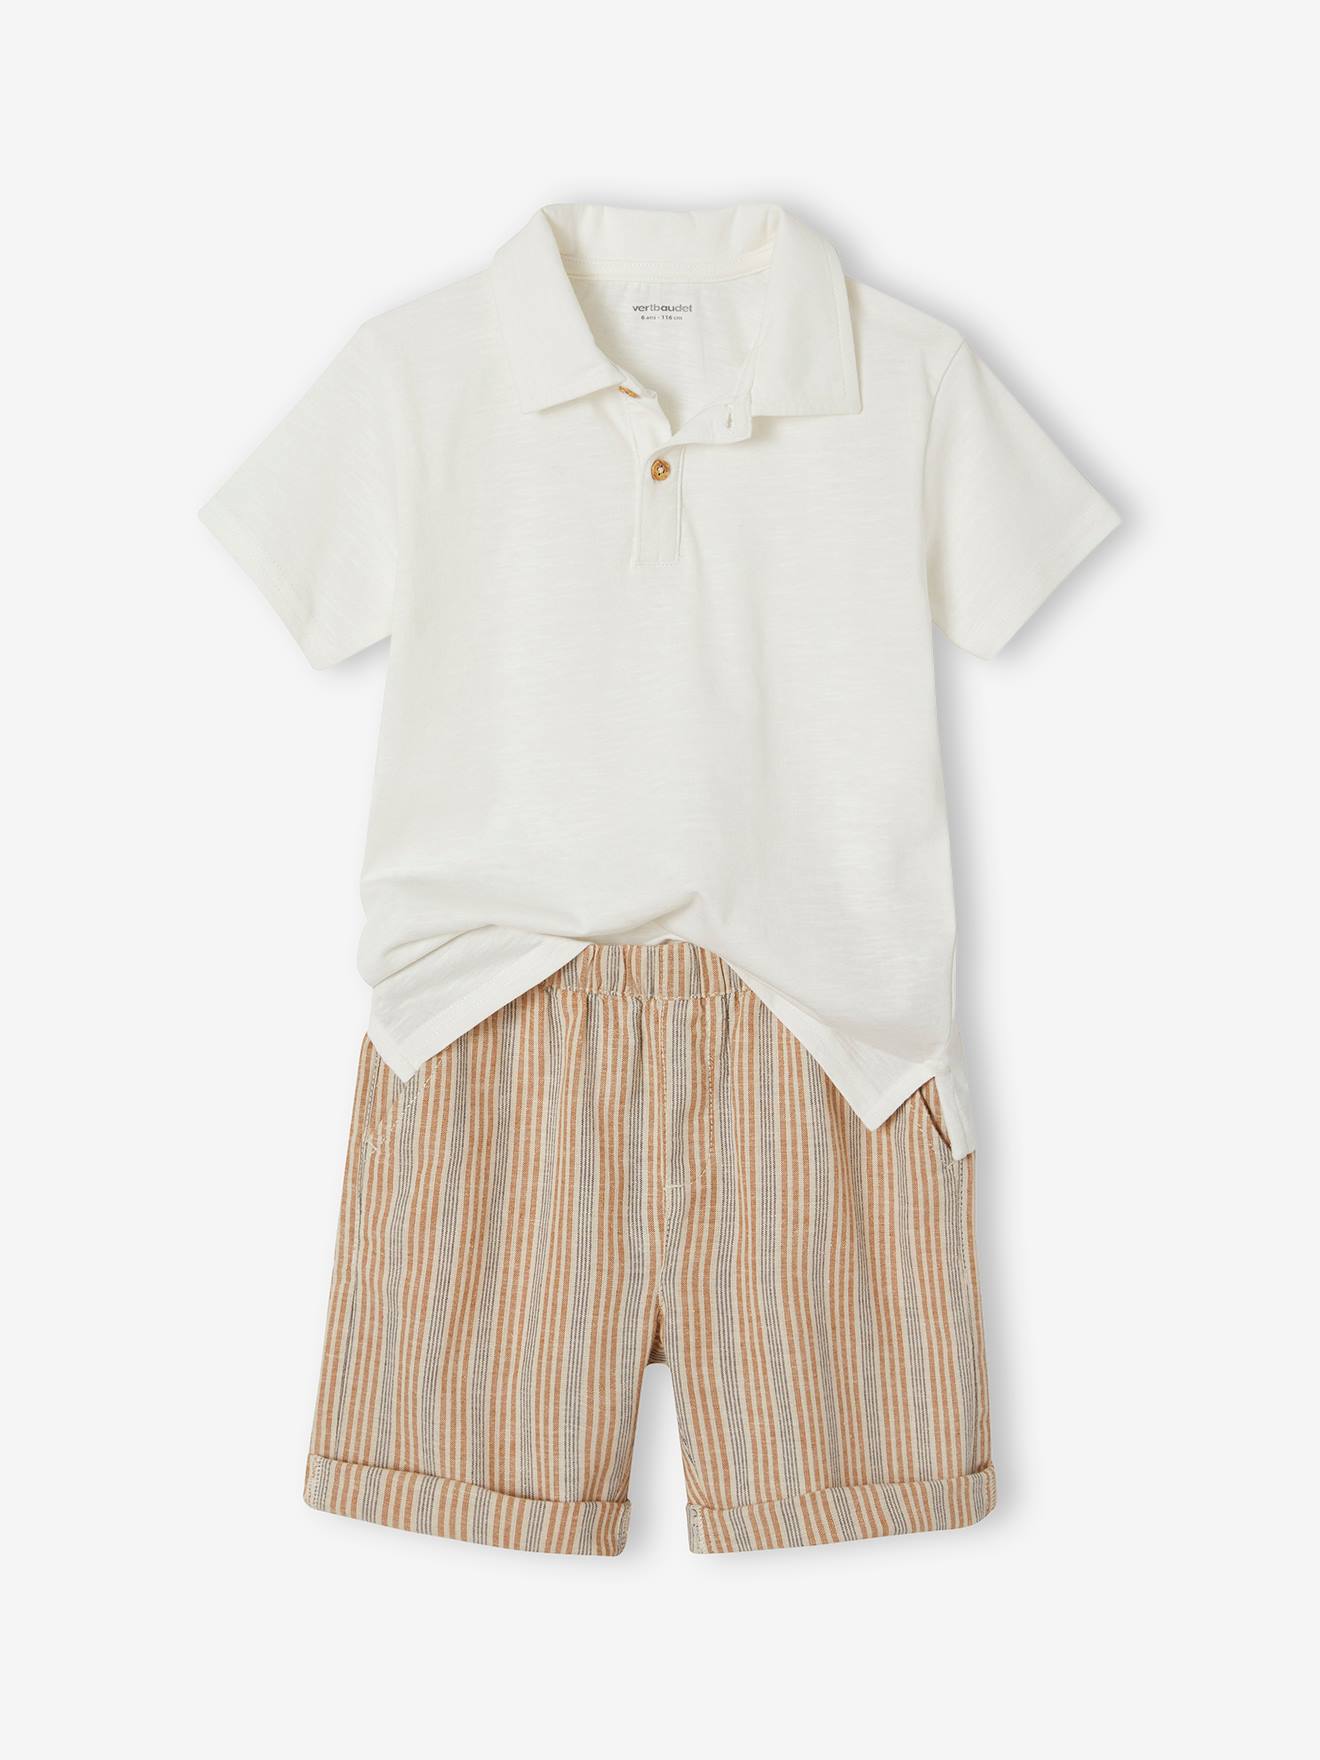 Occasion Wear Combo: Polo Shirt & Shorts for Boys striped white